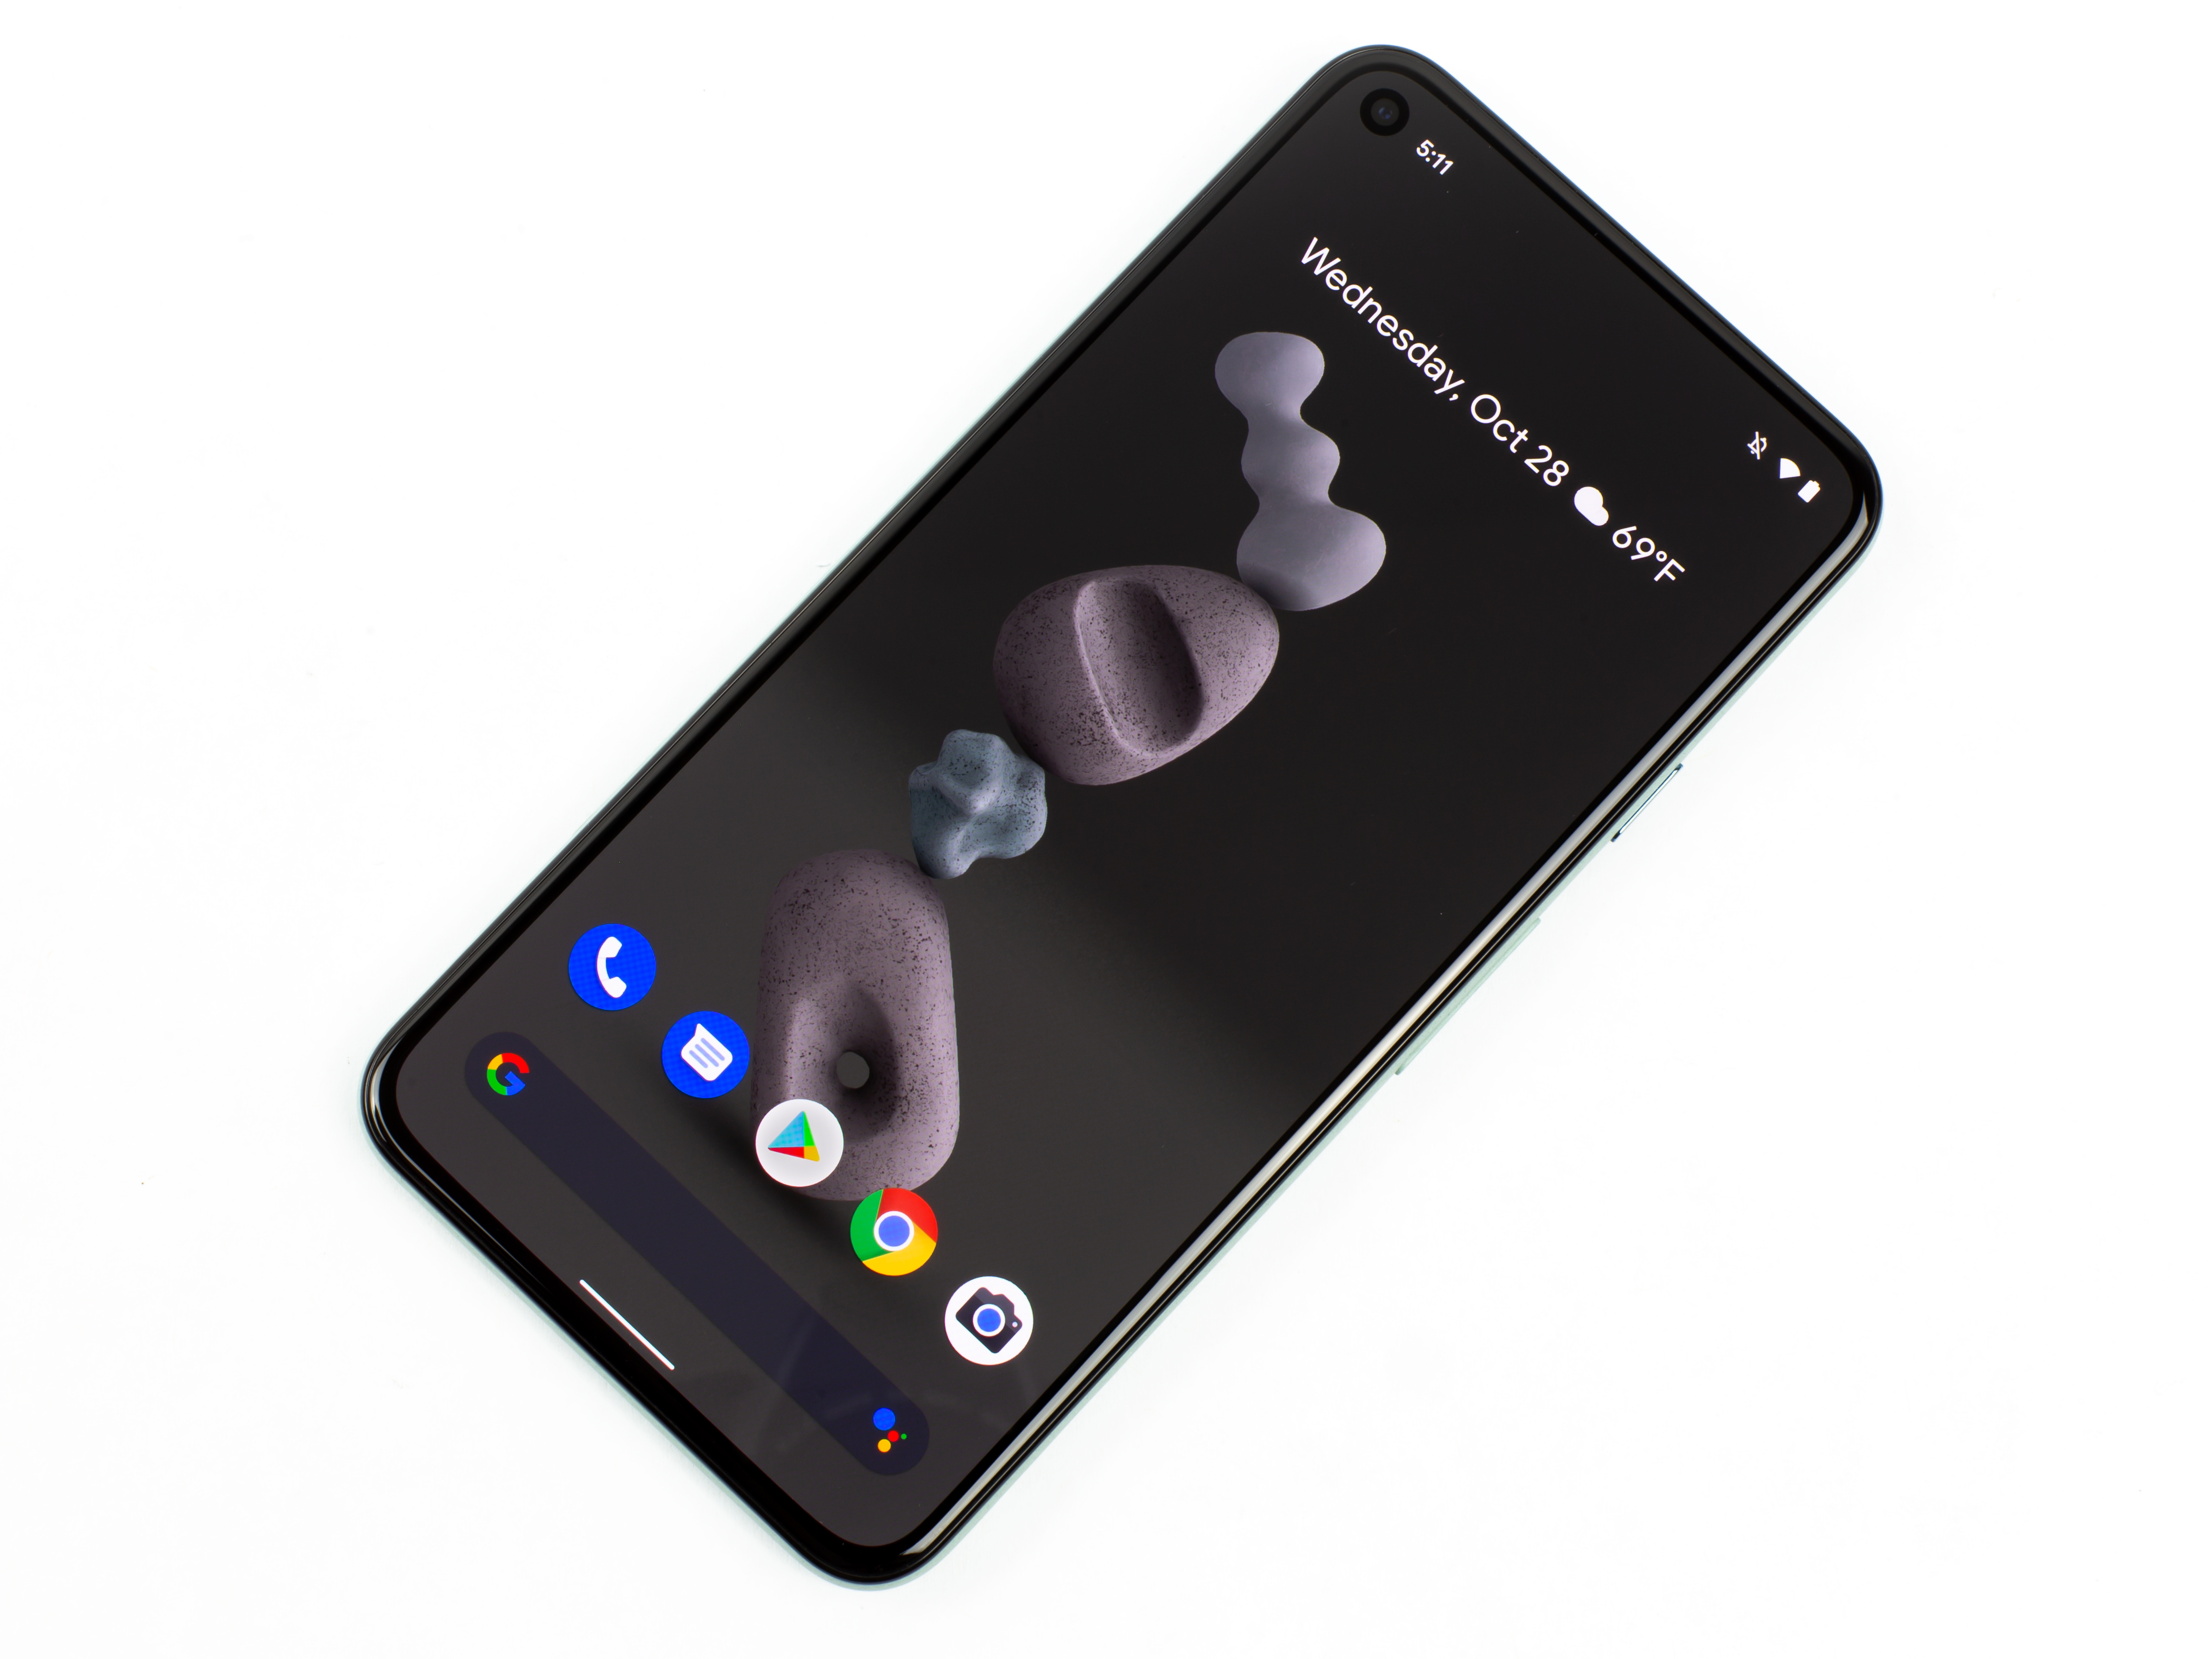 Google Pixel 5 and Pixel 4A 5G: Price, Specs, Release Date